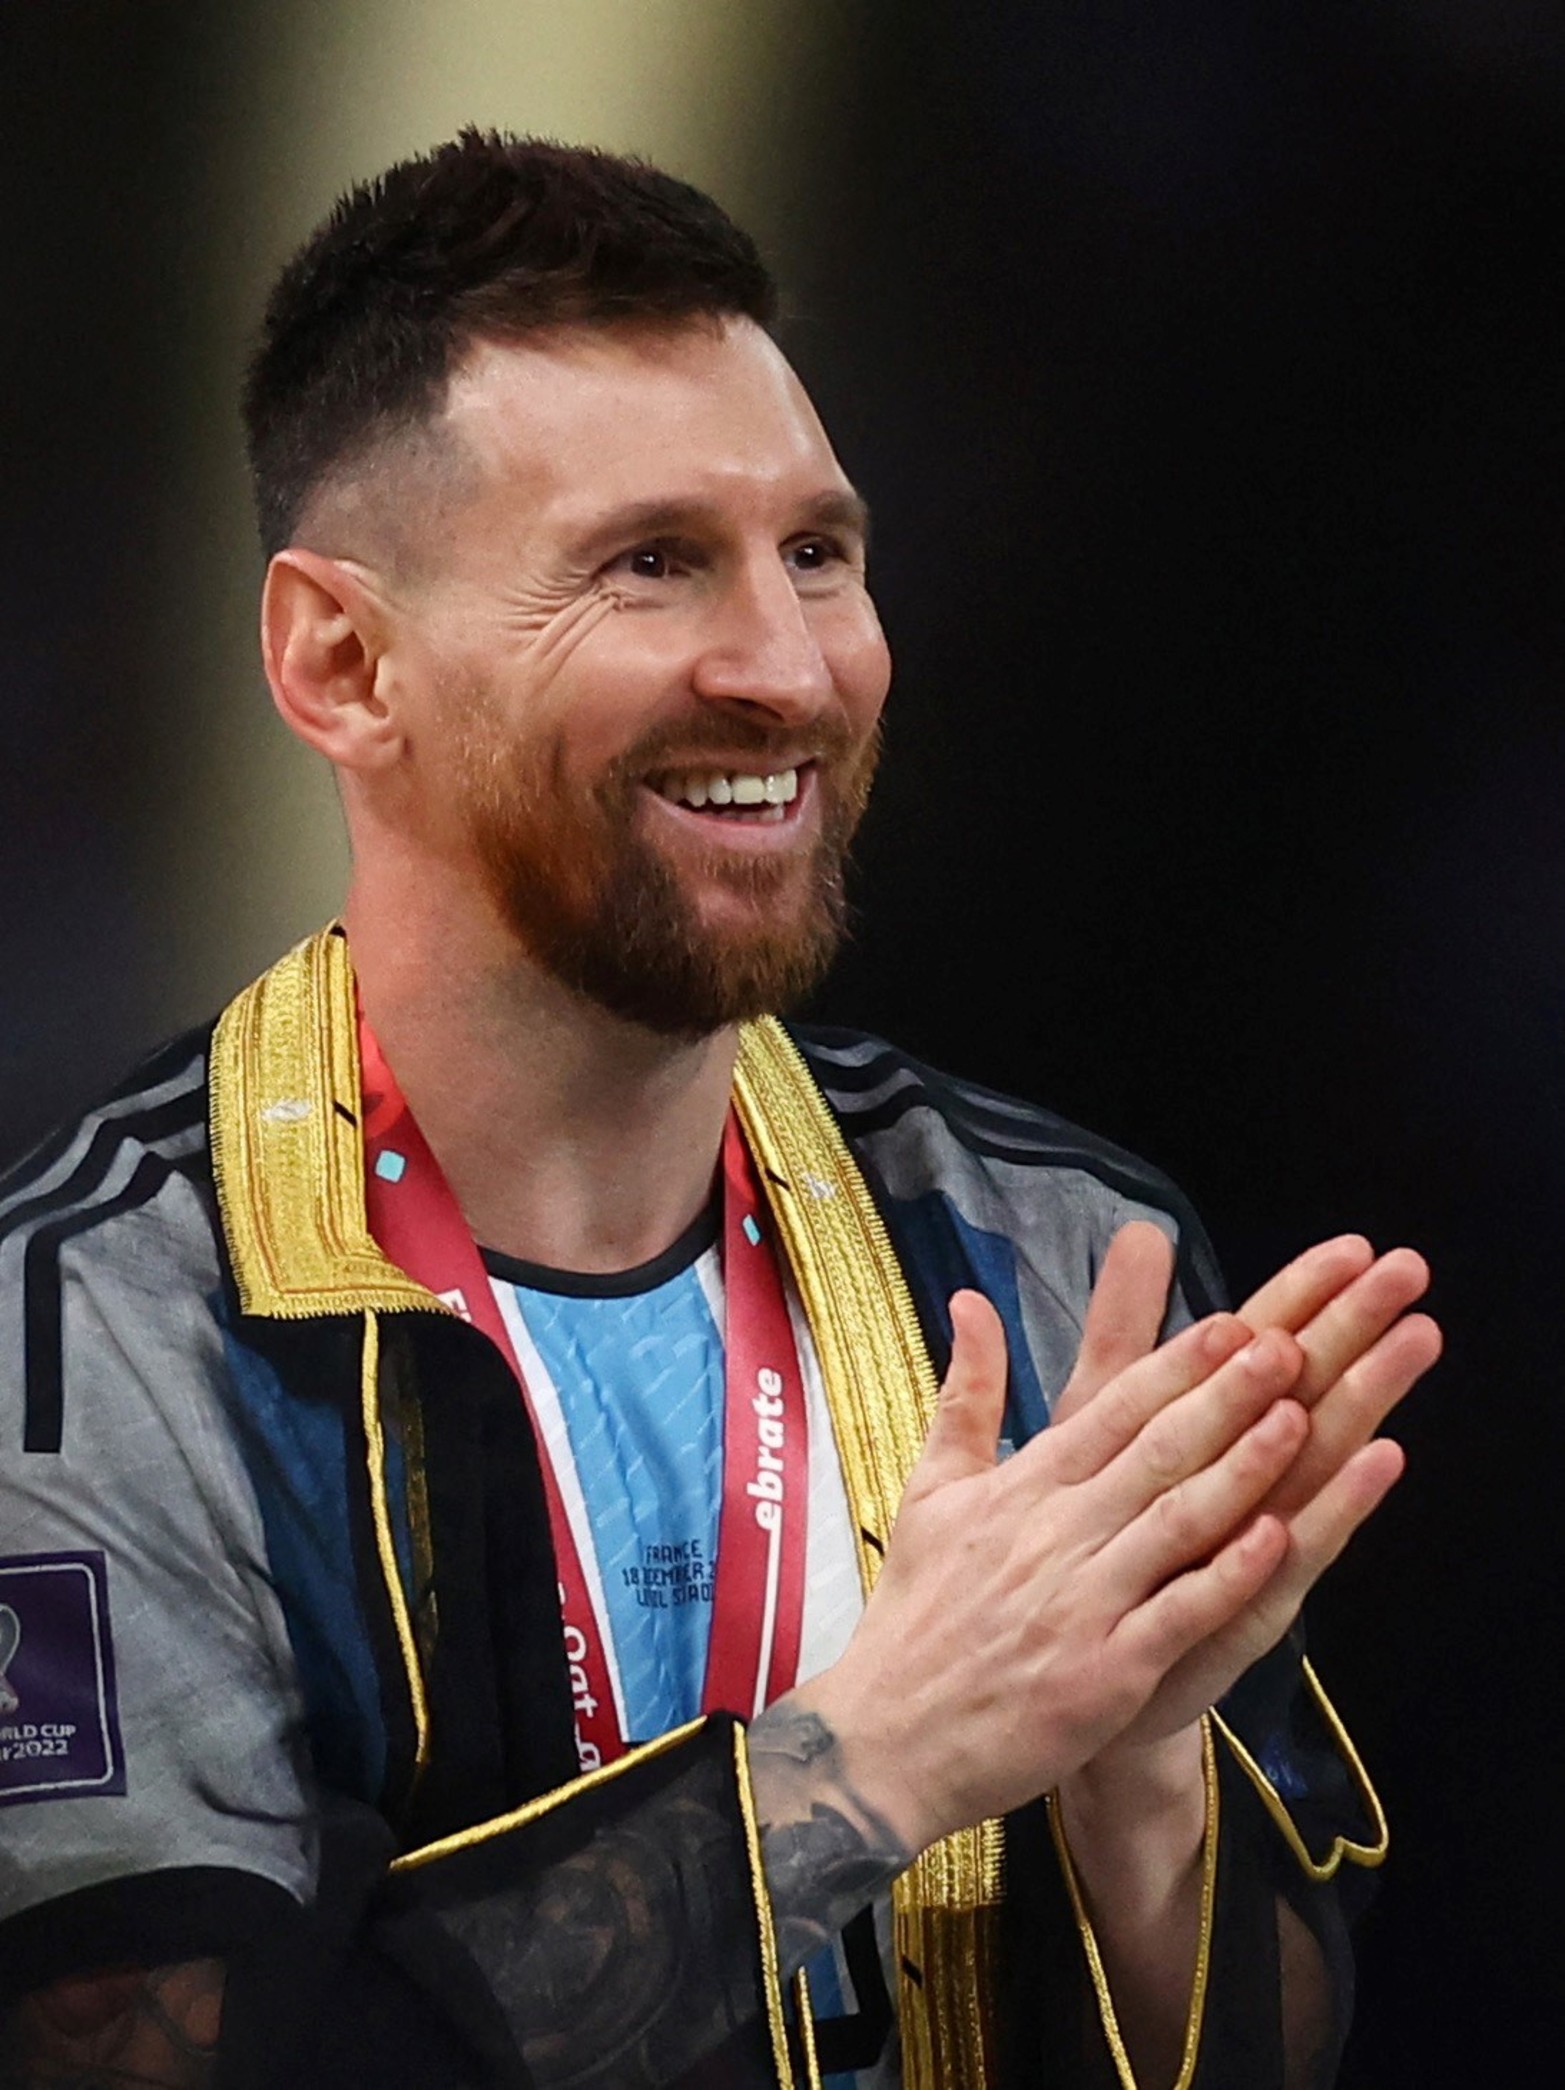 Soccer Football - FIFA World Cup Qatar 2022 - Final - Argentina v France - Lusail Stadium, Lusail, Qatar - December 18, 2022
Argentina's Lionel Messi during the medal ceremony as he celebrates after winning the World Cup REUTERS/Kai Pfaffenbach